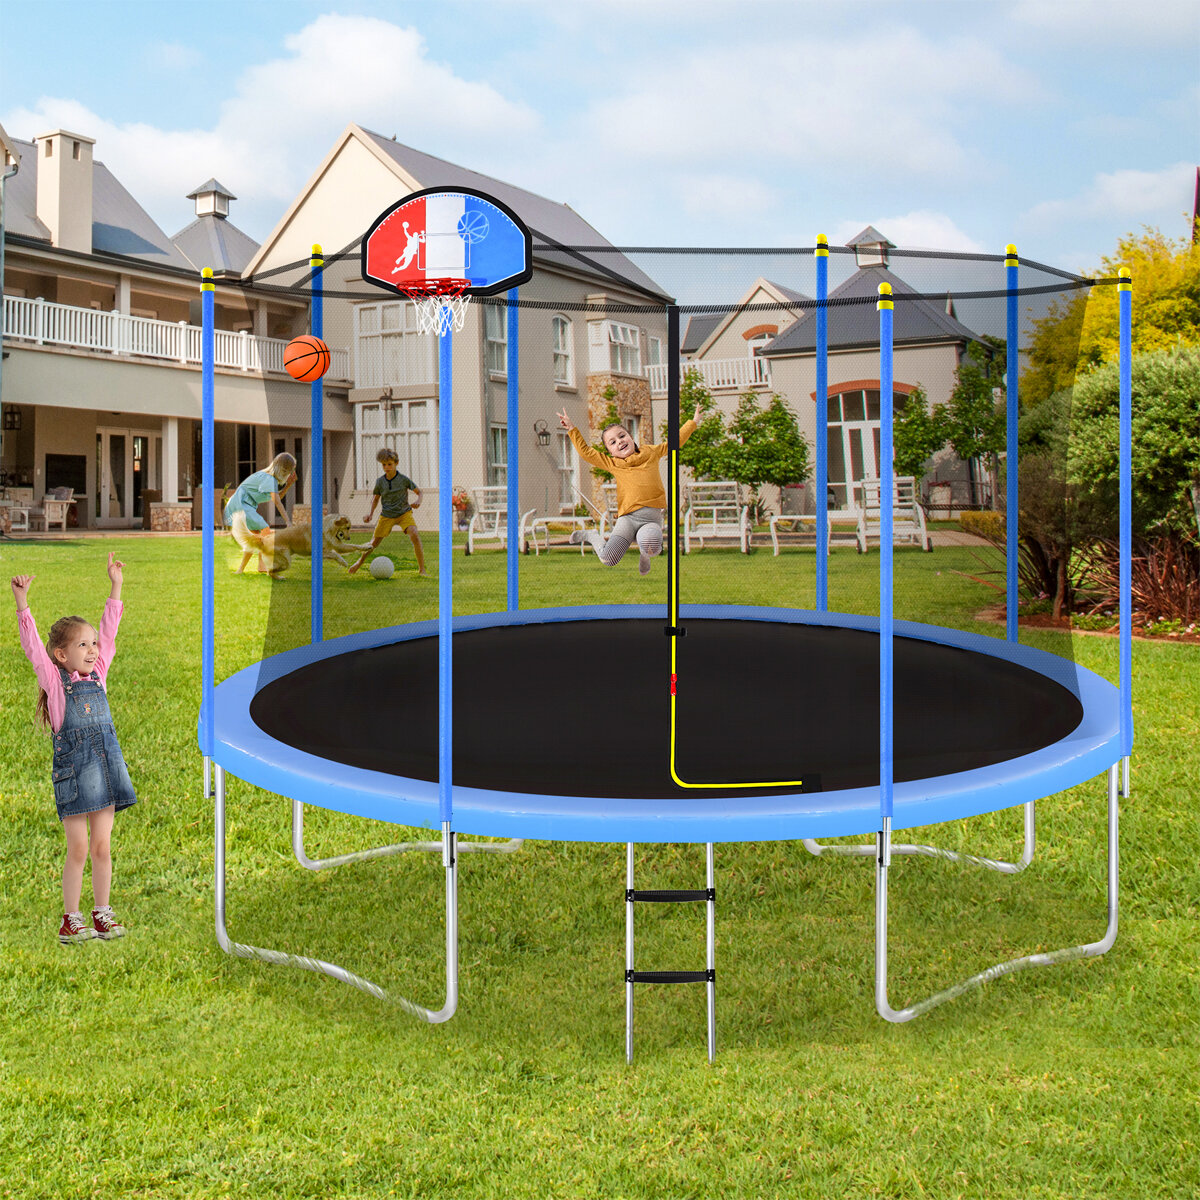 Outdoor Trampoline with Basketball Hoop Safety Enclosure Net and Ladder Trampoline for Adults Black Blue AUKUYE 14FT Trampoline for Kids 